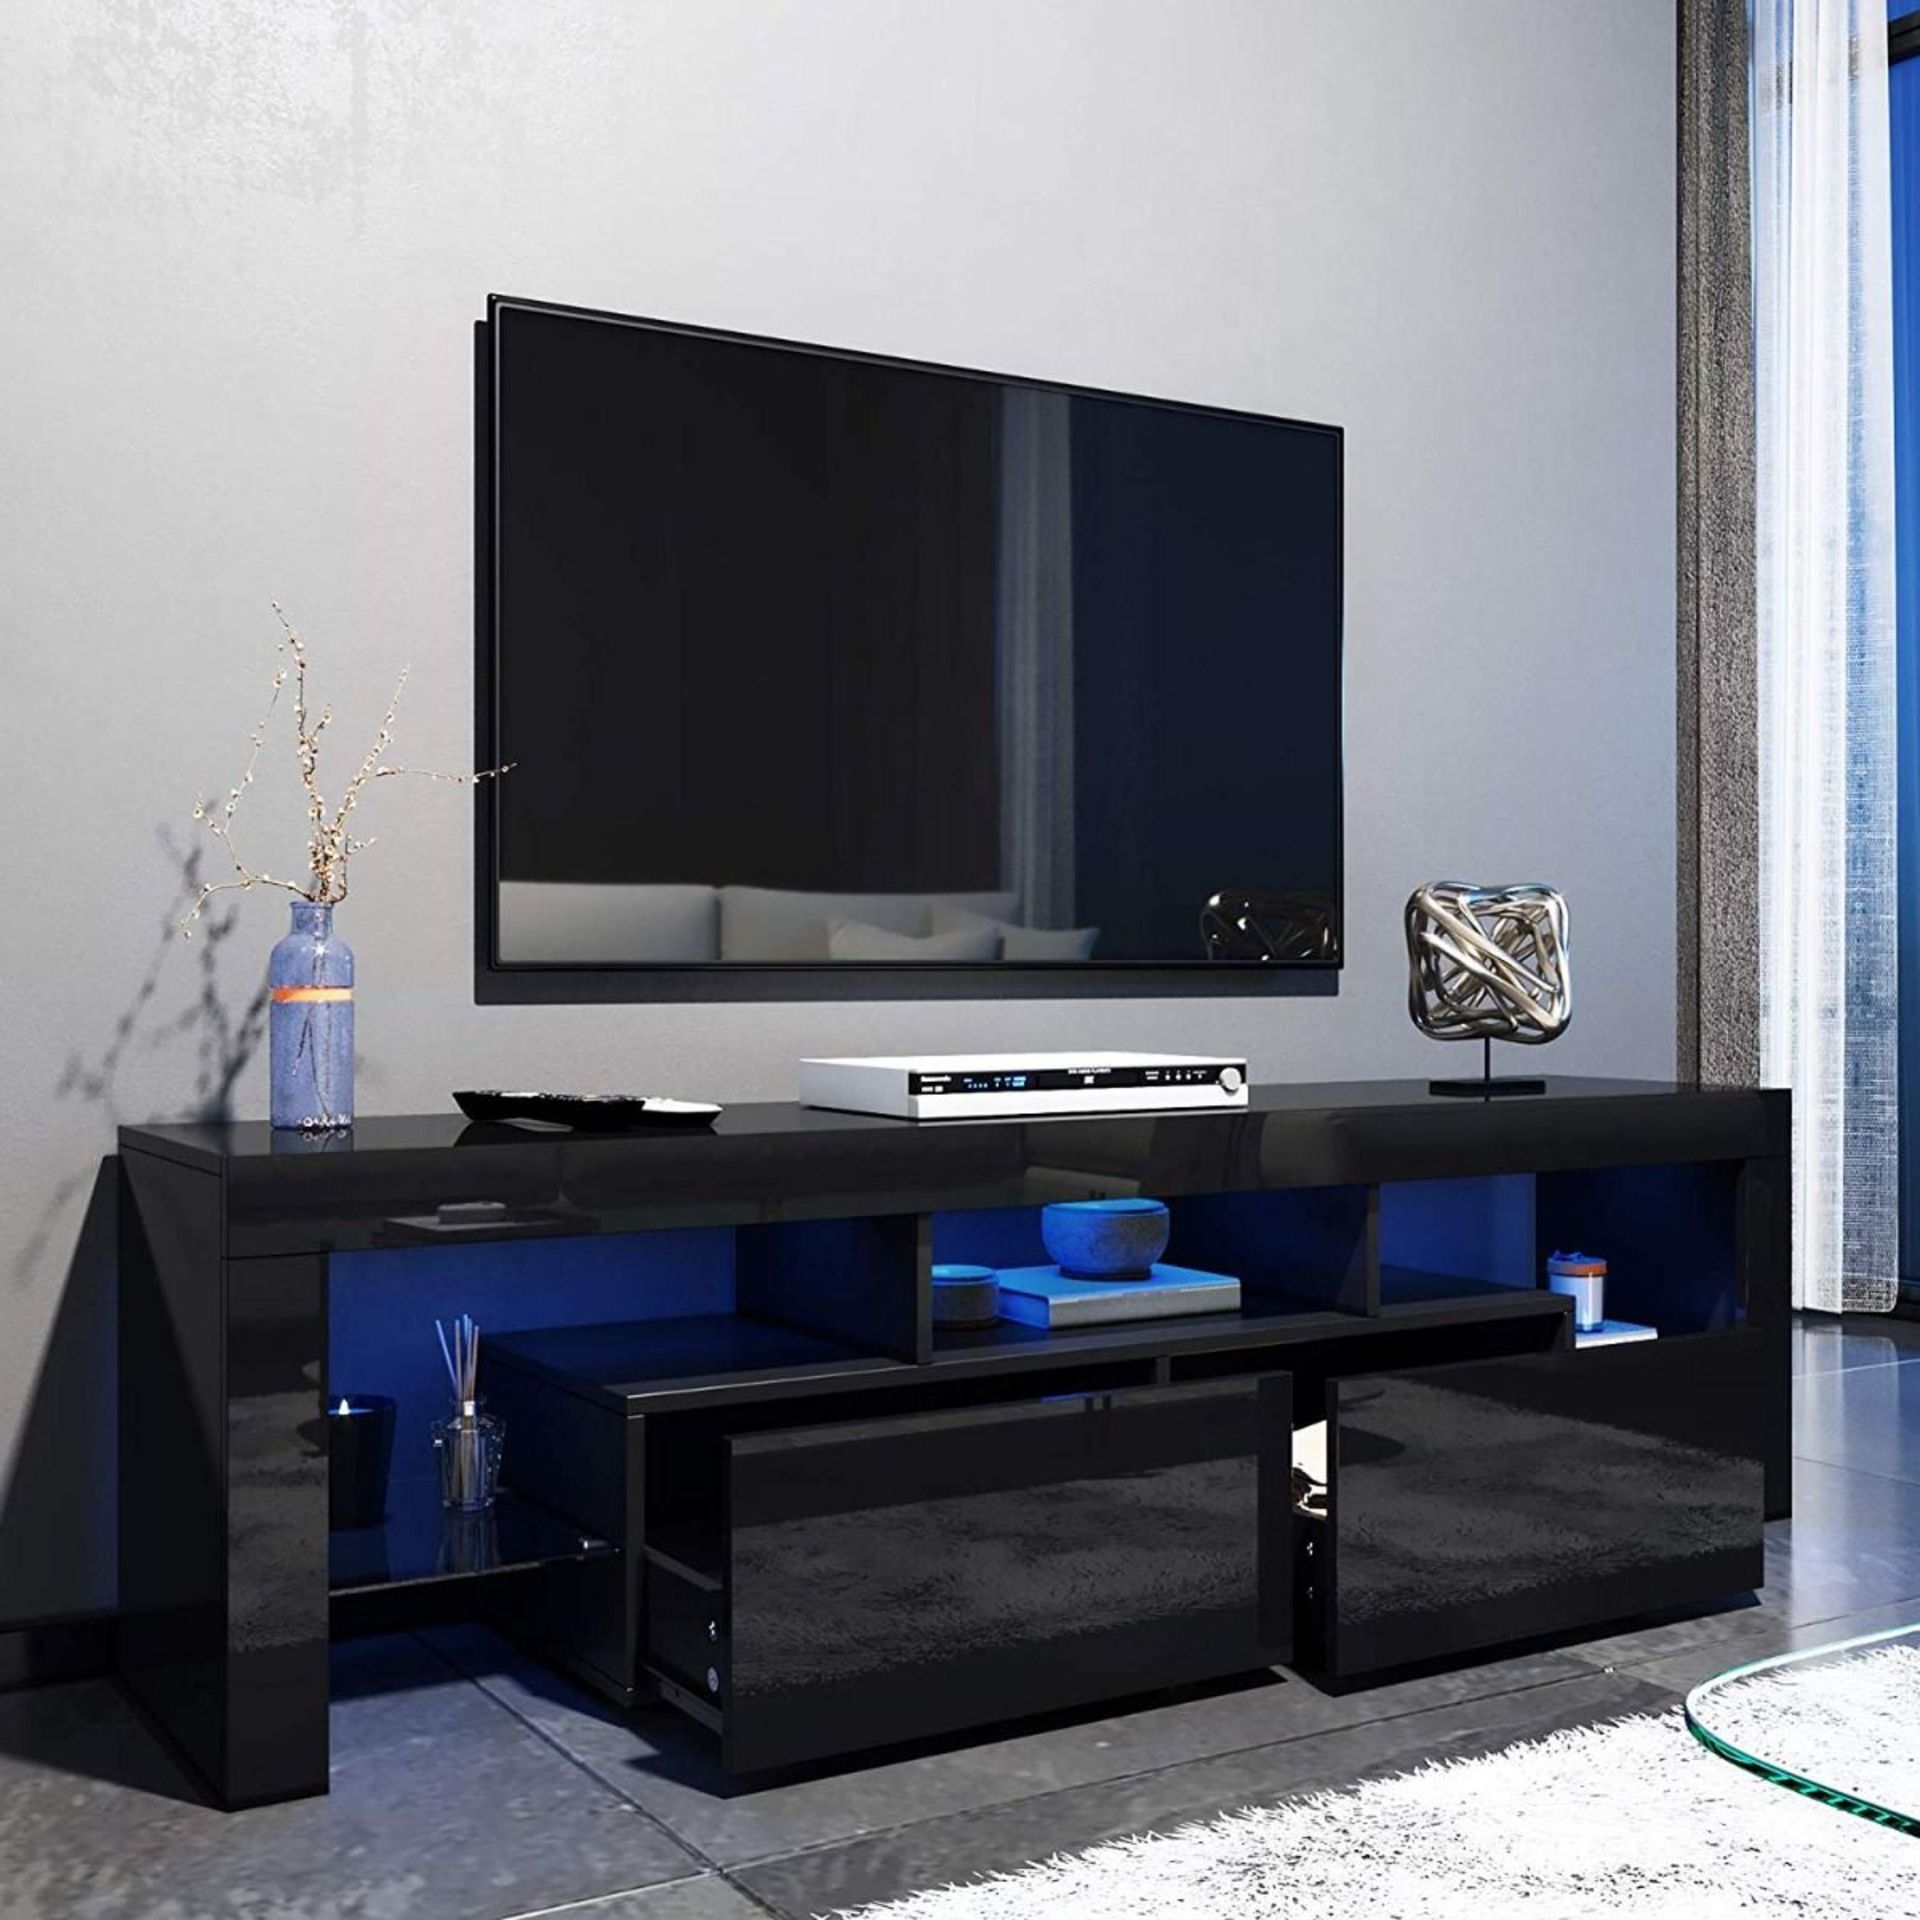 5 X BRAND NEW LED MODERN 160CM TV UNIT CABINET TV STAND HIGH GLOSS DOORS WITH LED LIGHTS - Image 2 of 3